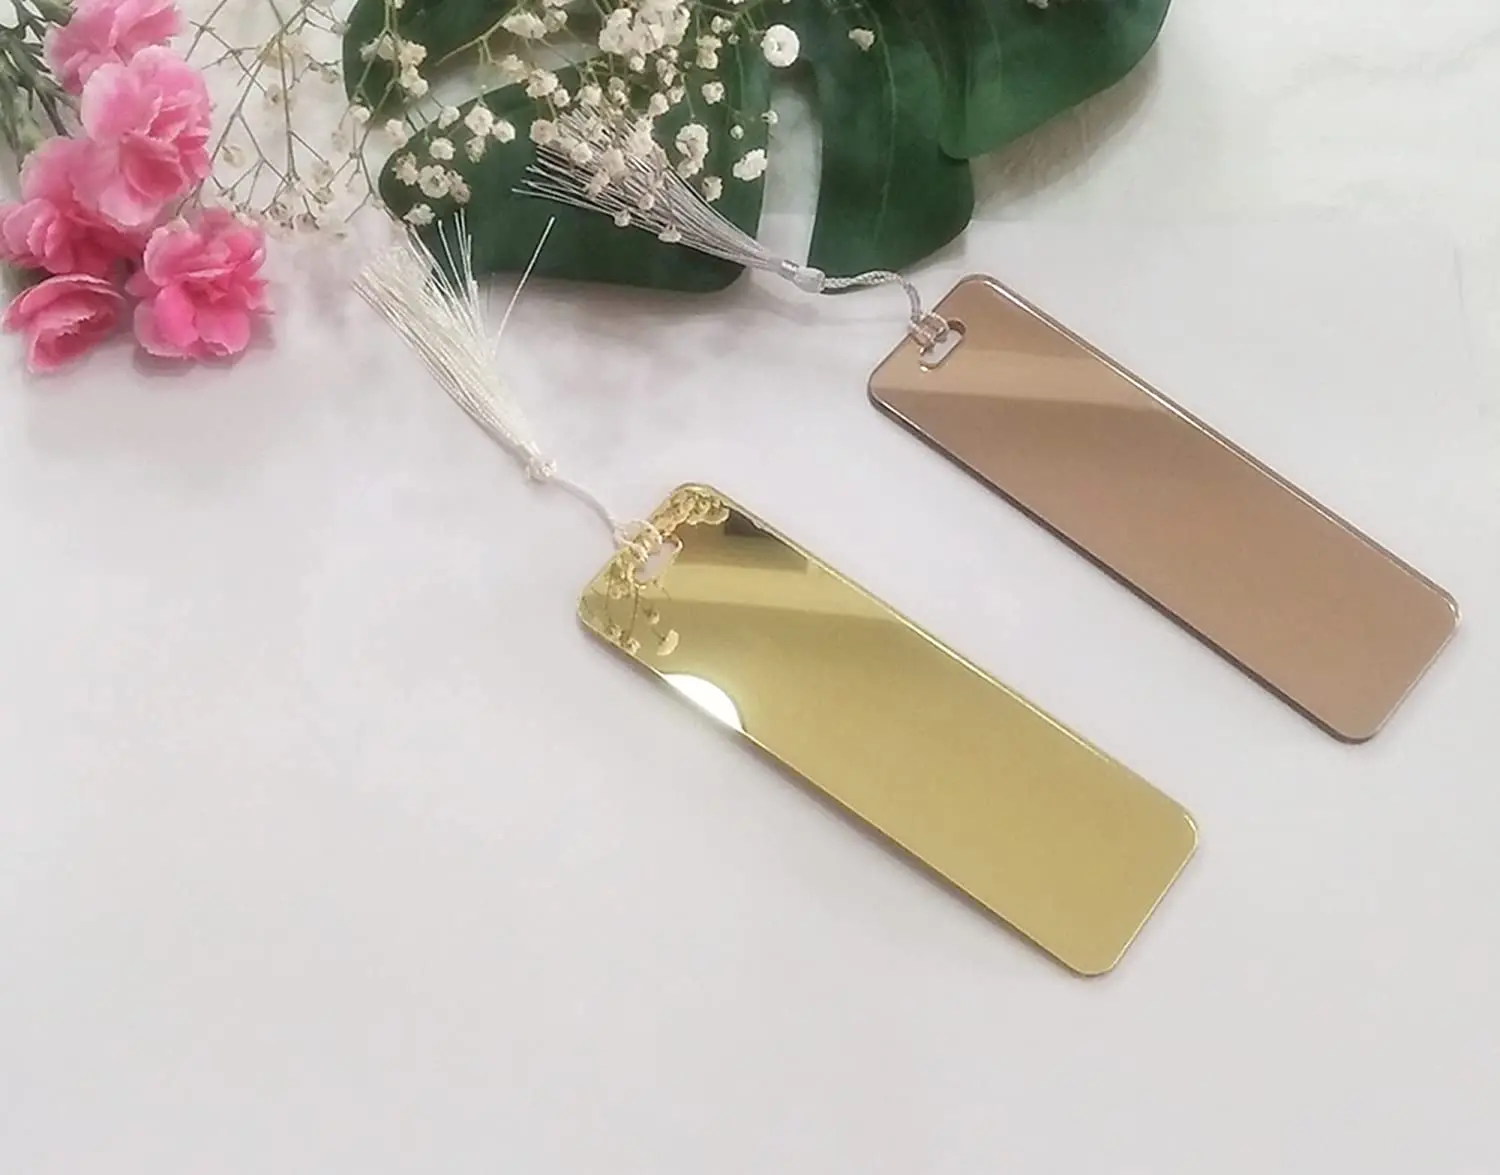 6x2” Rose Gold Acrylic Bookmark, 20 Pack